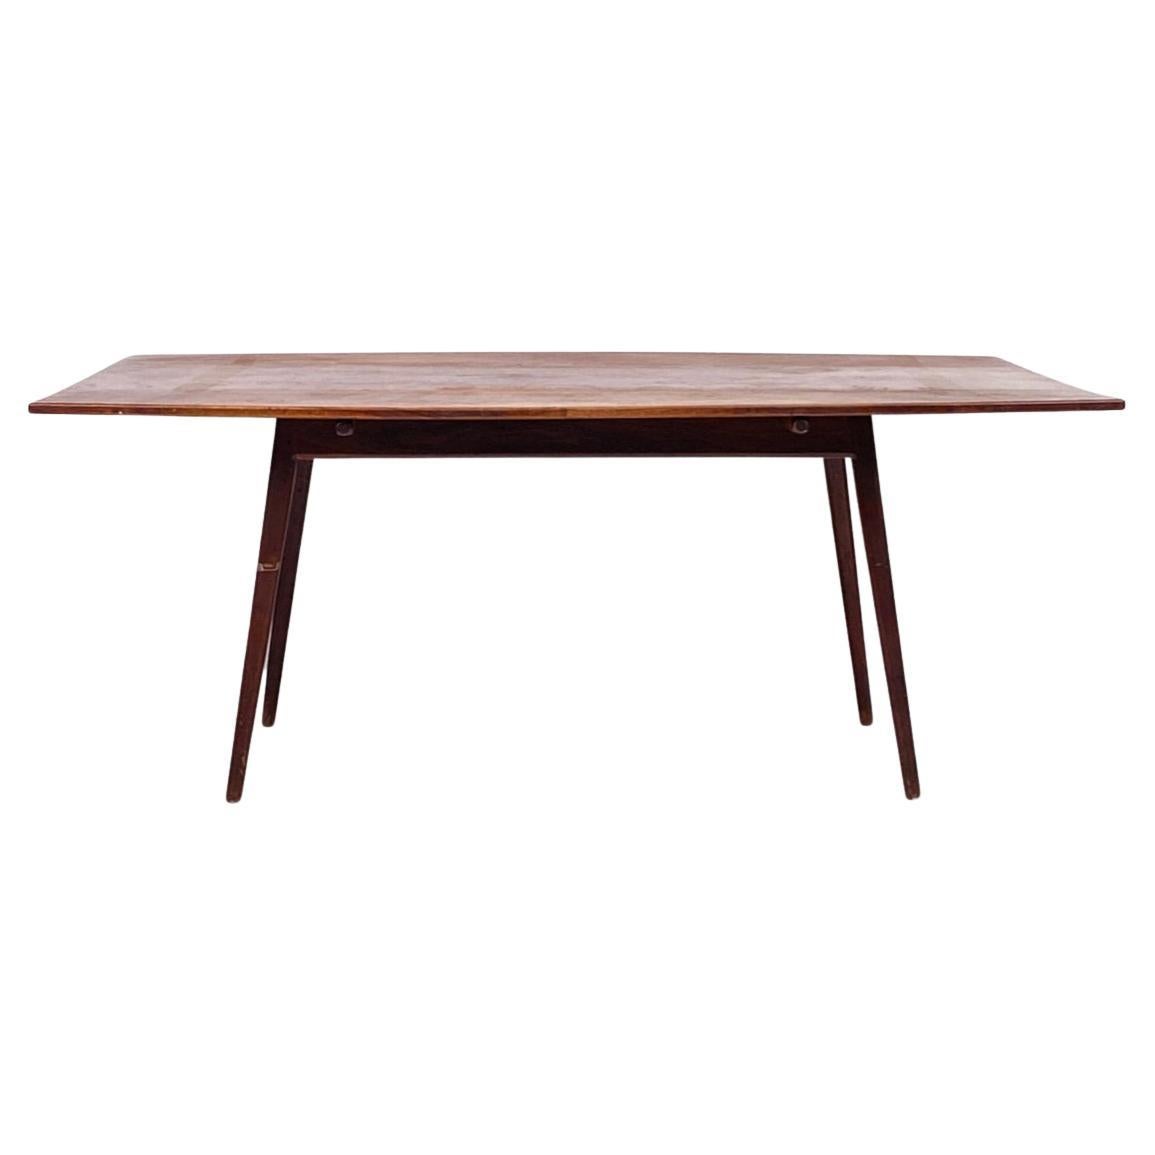 Mid-Century Modern American Studio Craft Solid Walnut Drop Leaf Dining Table by Walker Weed  For Sale